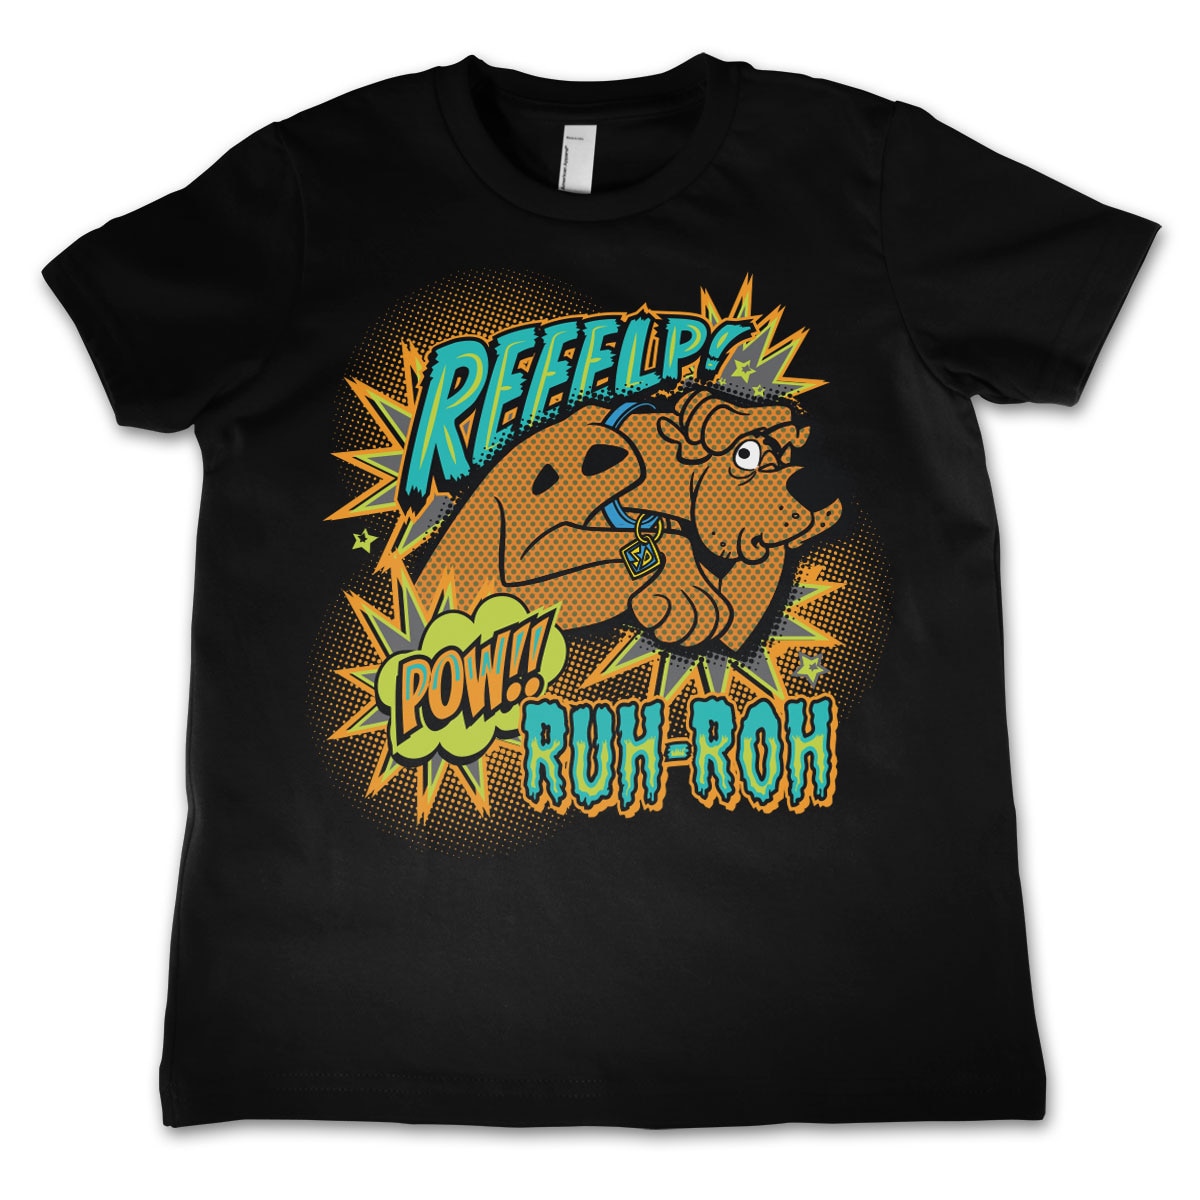 Scooby Doo Reeelp Kids T-Shirt Age 3-12 Years Officially Licensed Scooby Doo 